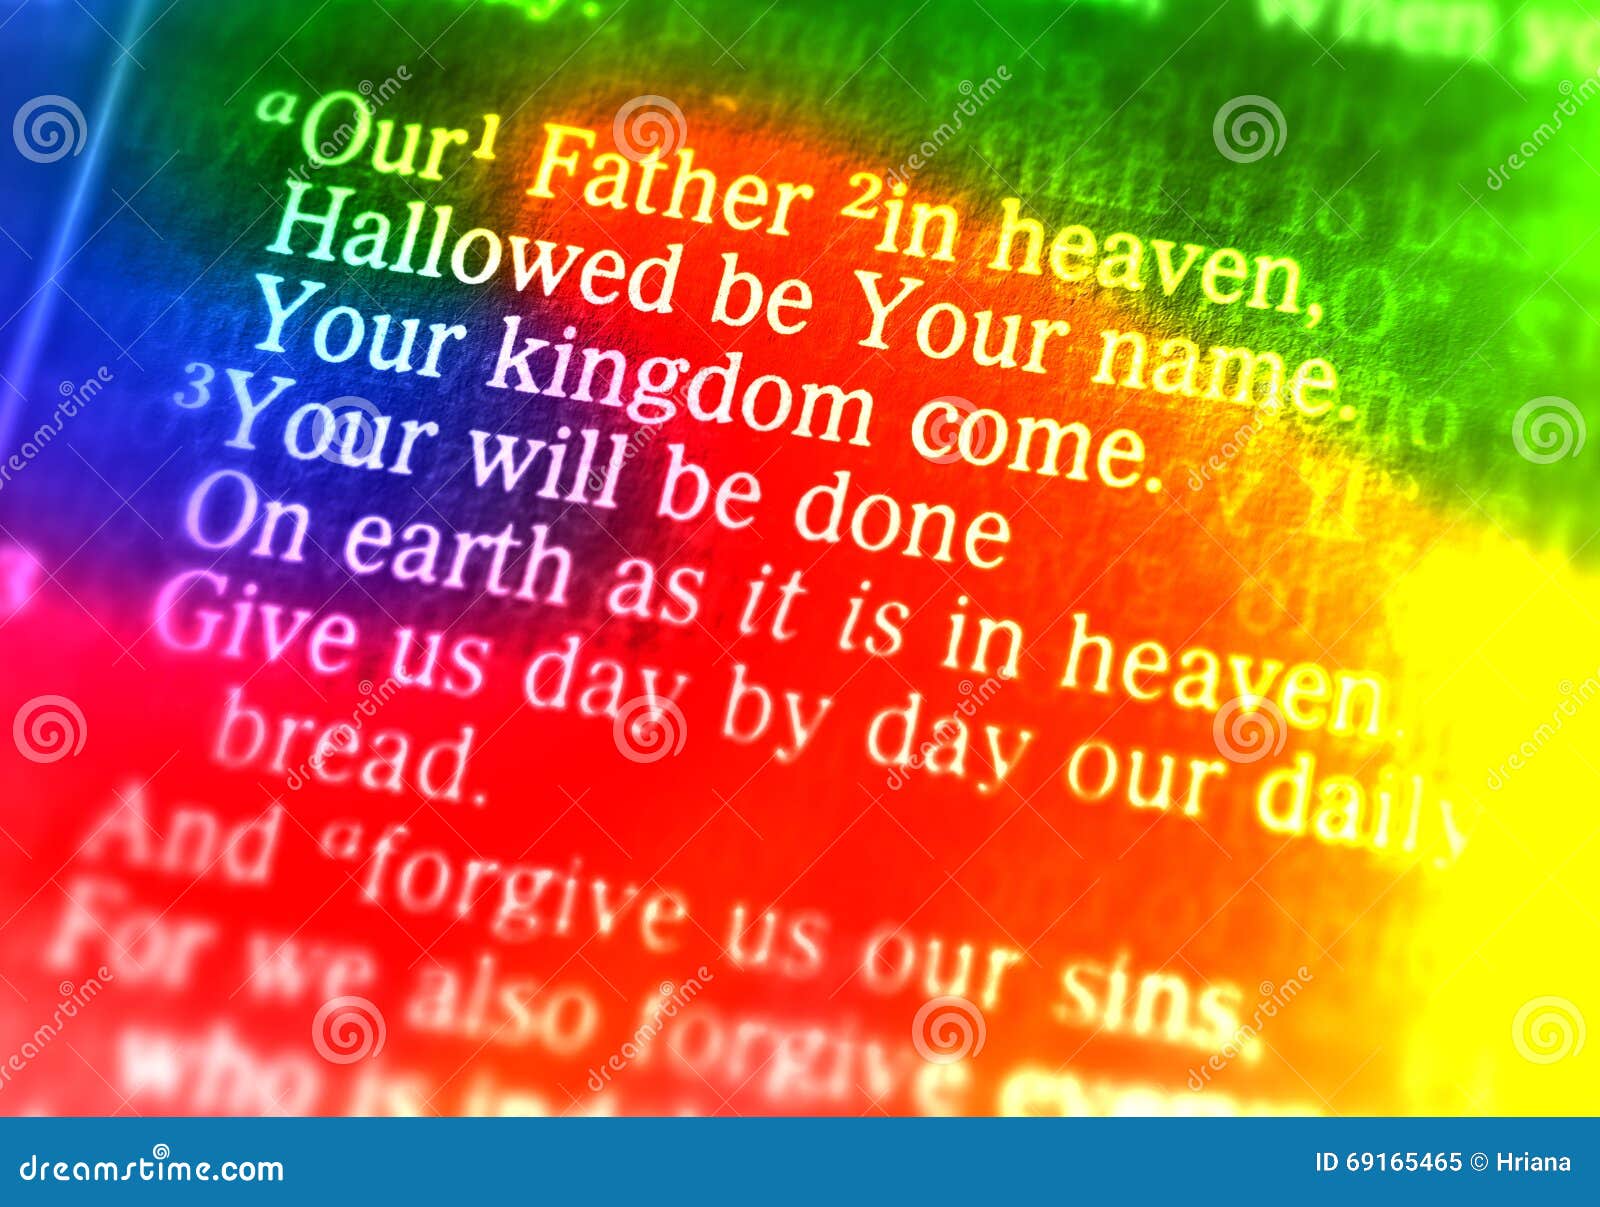 the lord's prayer - our father in heaven